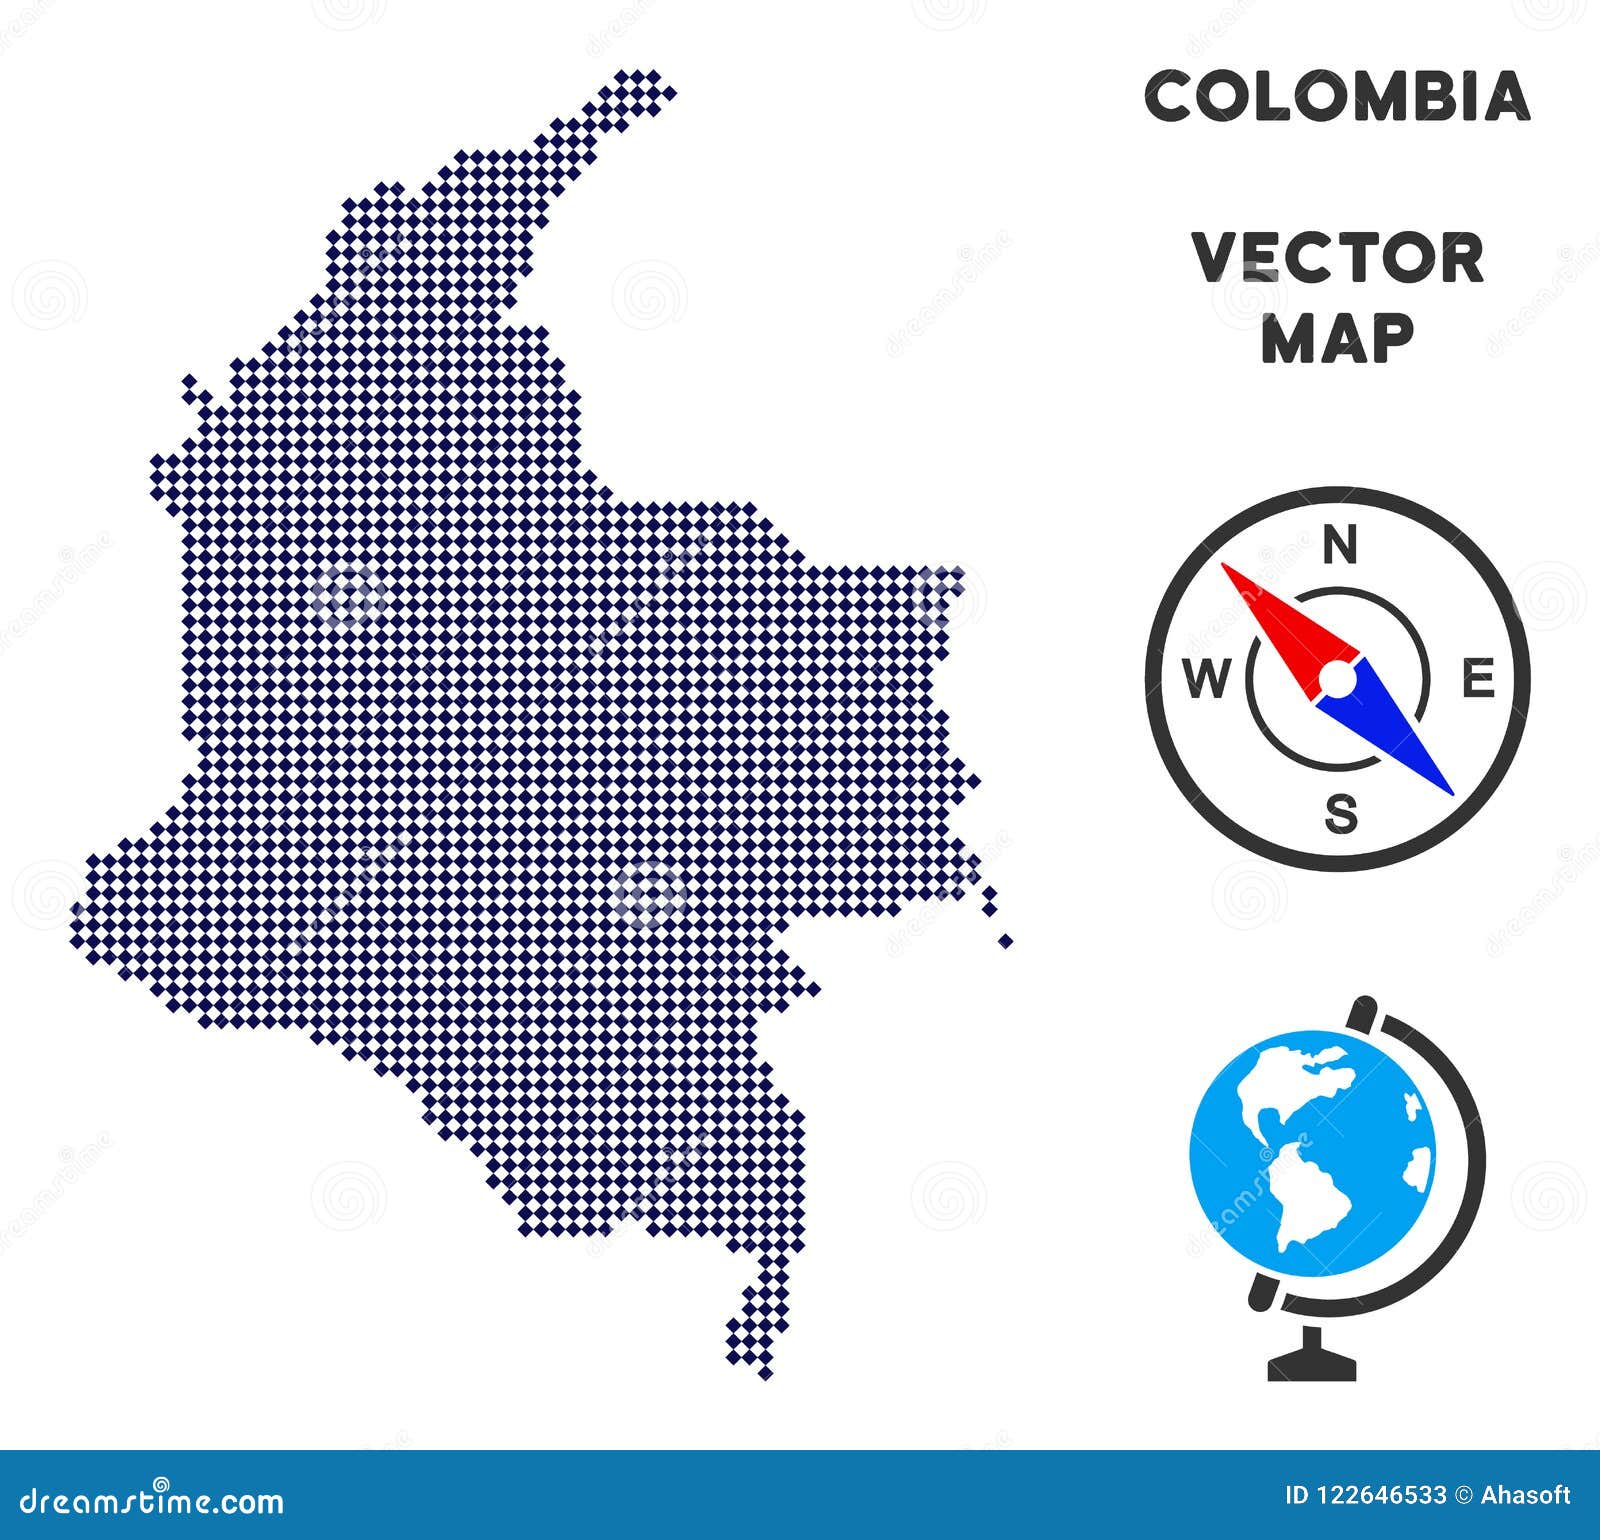 Dot Colombia Map Stock Vector Illustration Of Vector 122646533